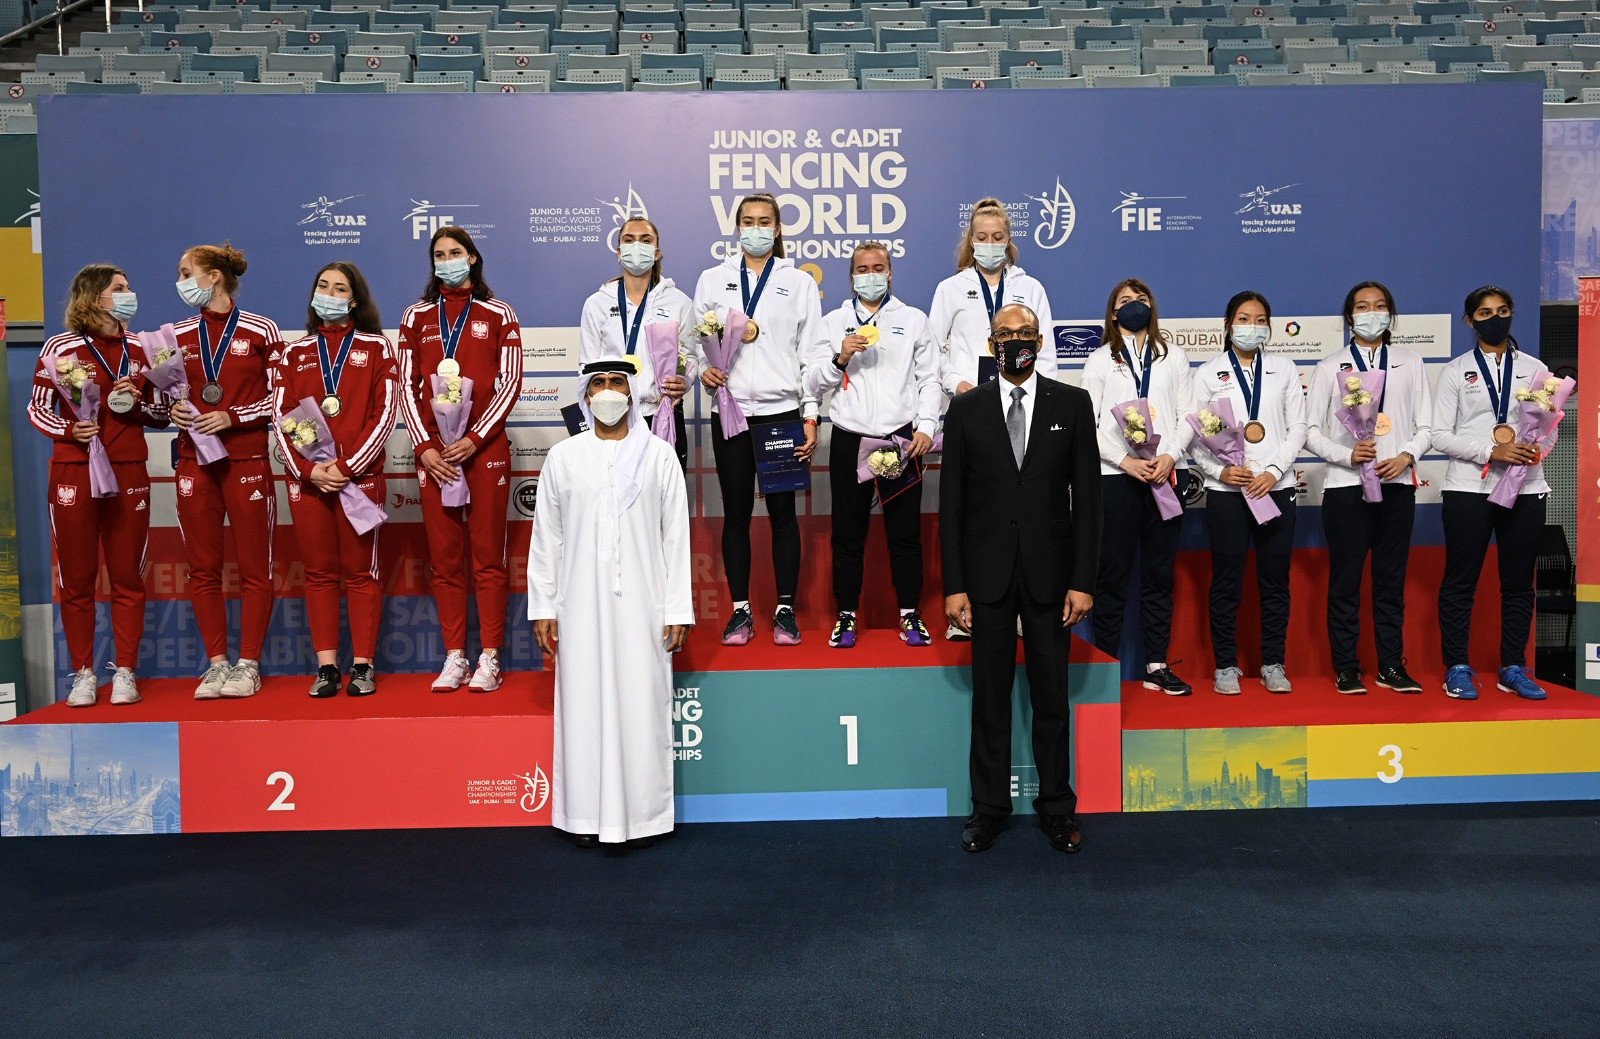 Israel claimed the women's junior epee title on the last day in Dubai ©FIE